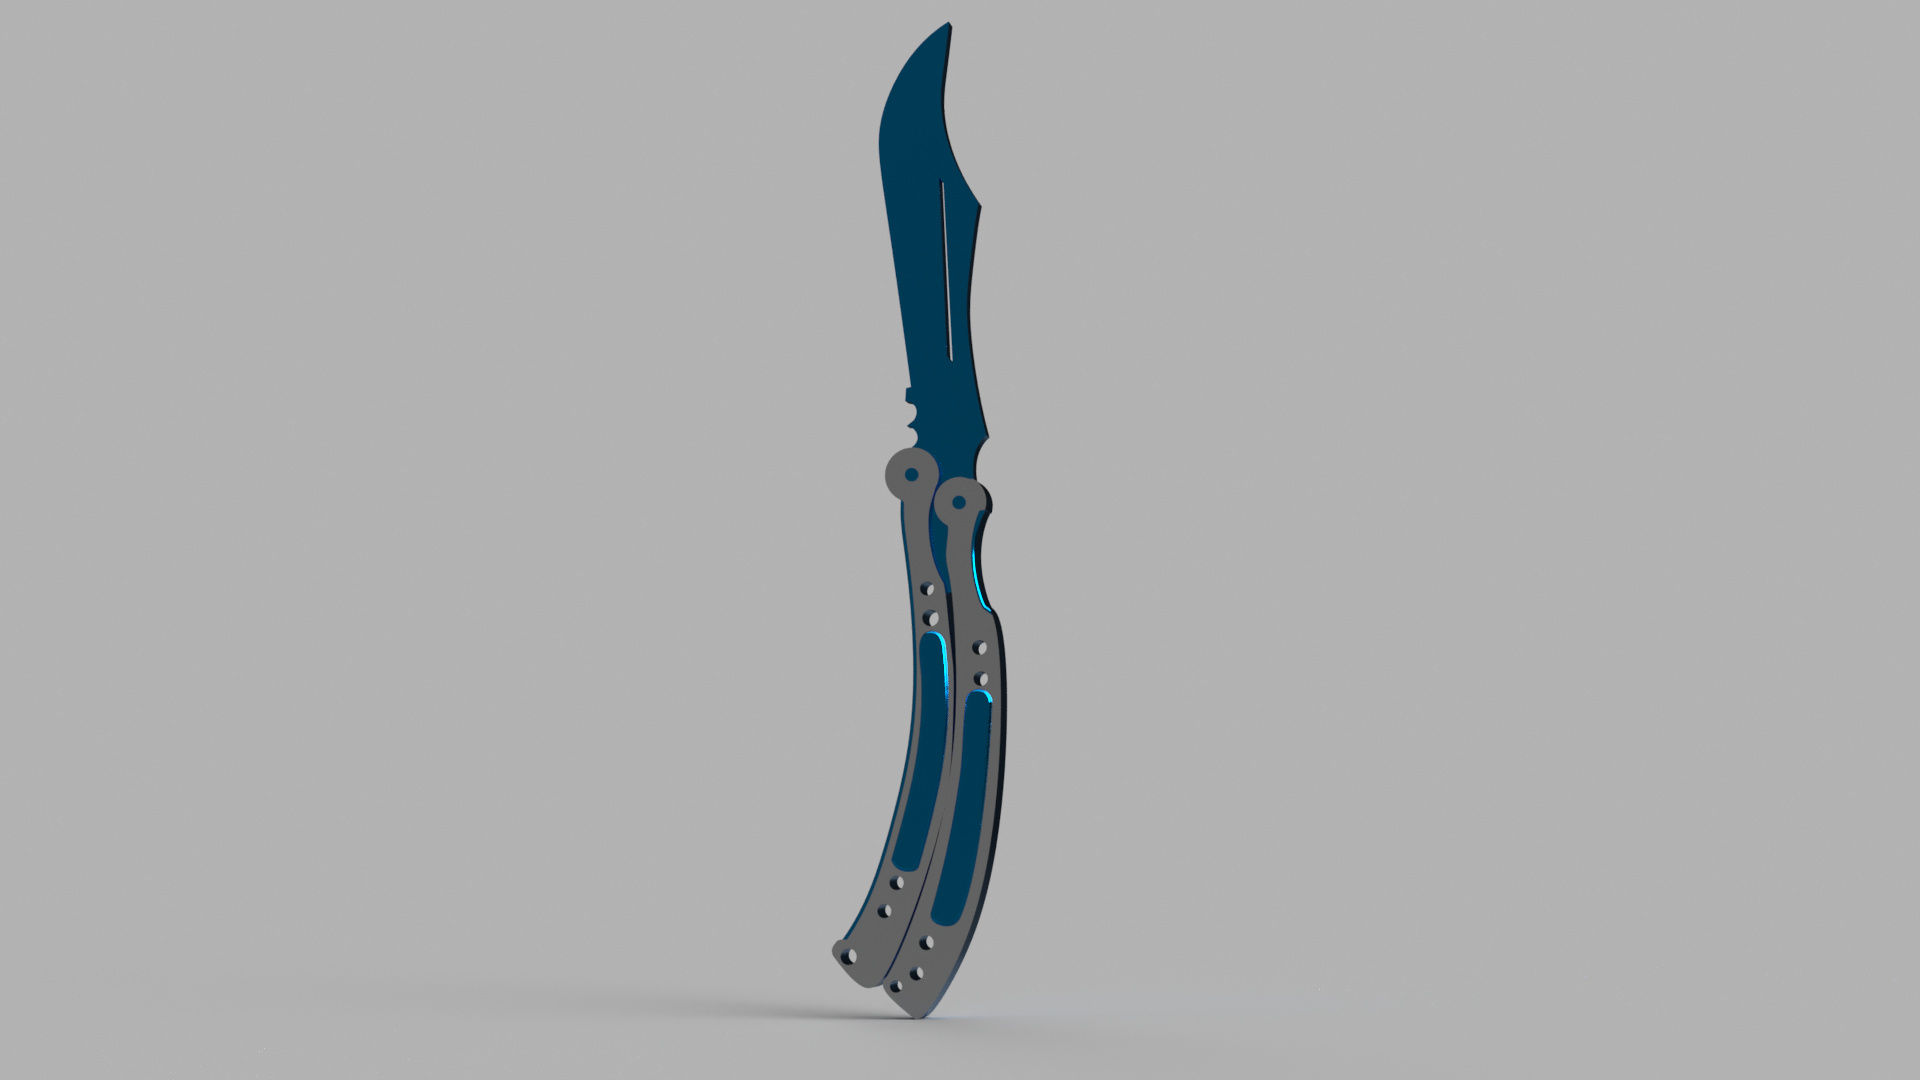 Csgo Style Butterfly Knife / Balisong11/21/2017 - Blade , HD Wallpaper & Backgrounds